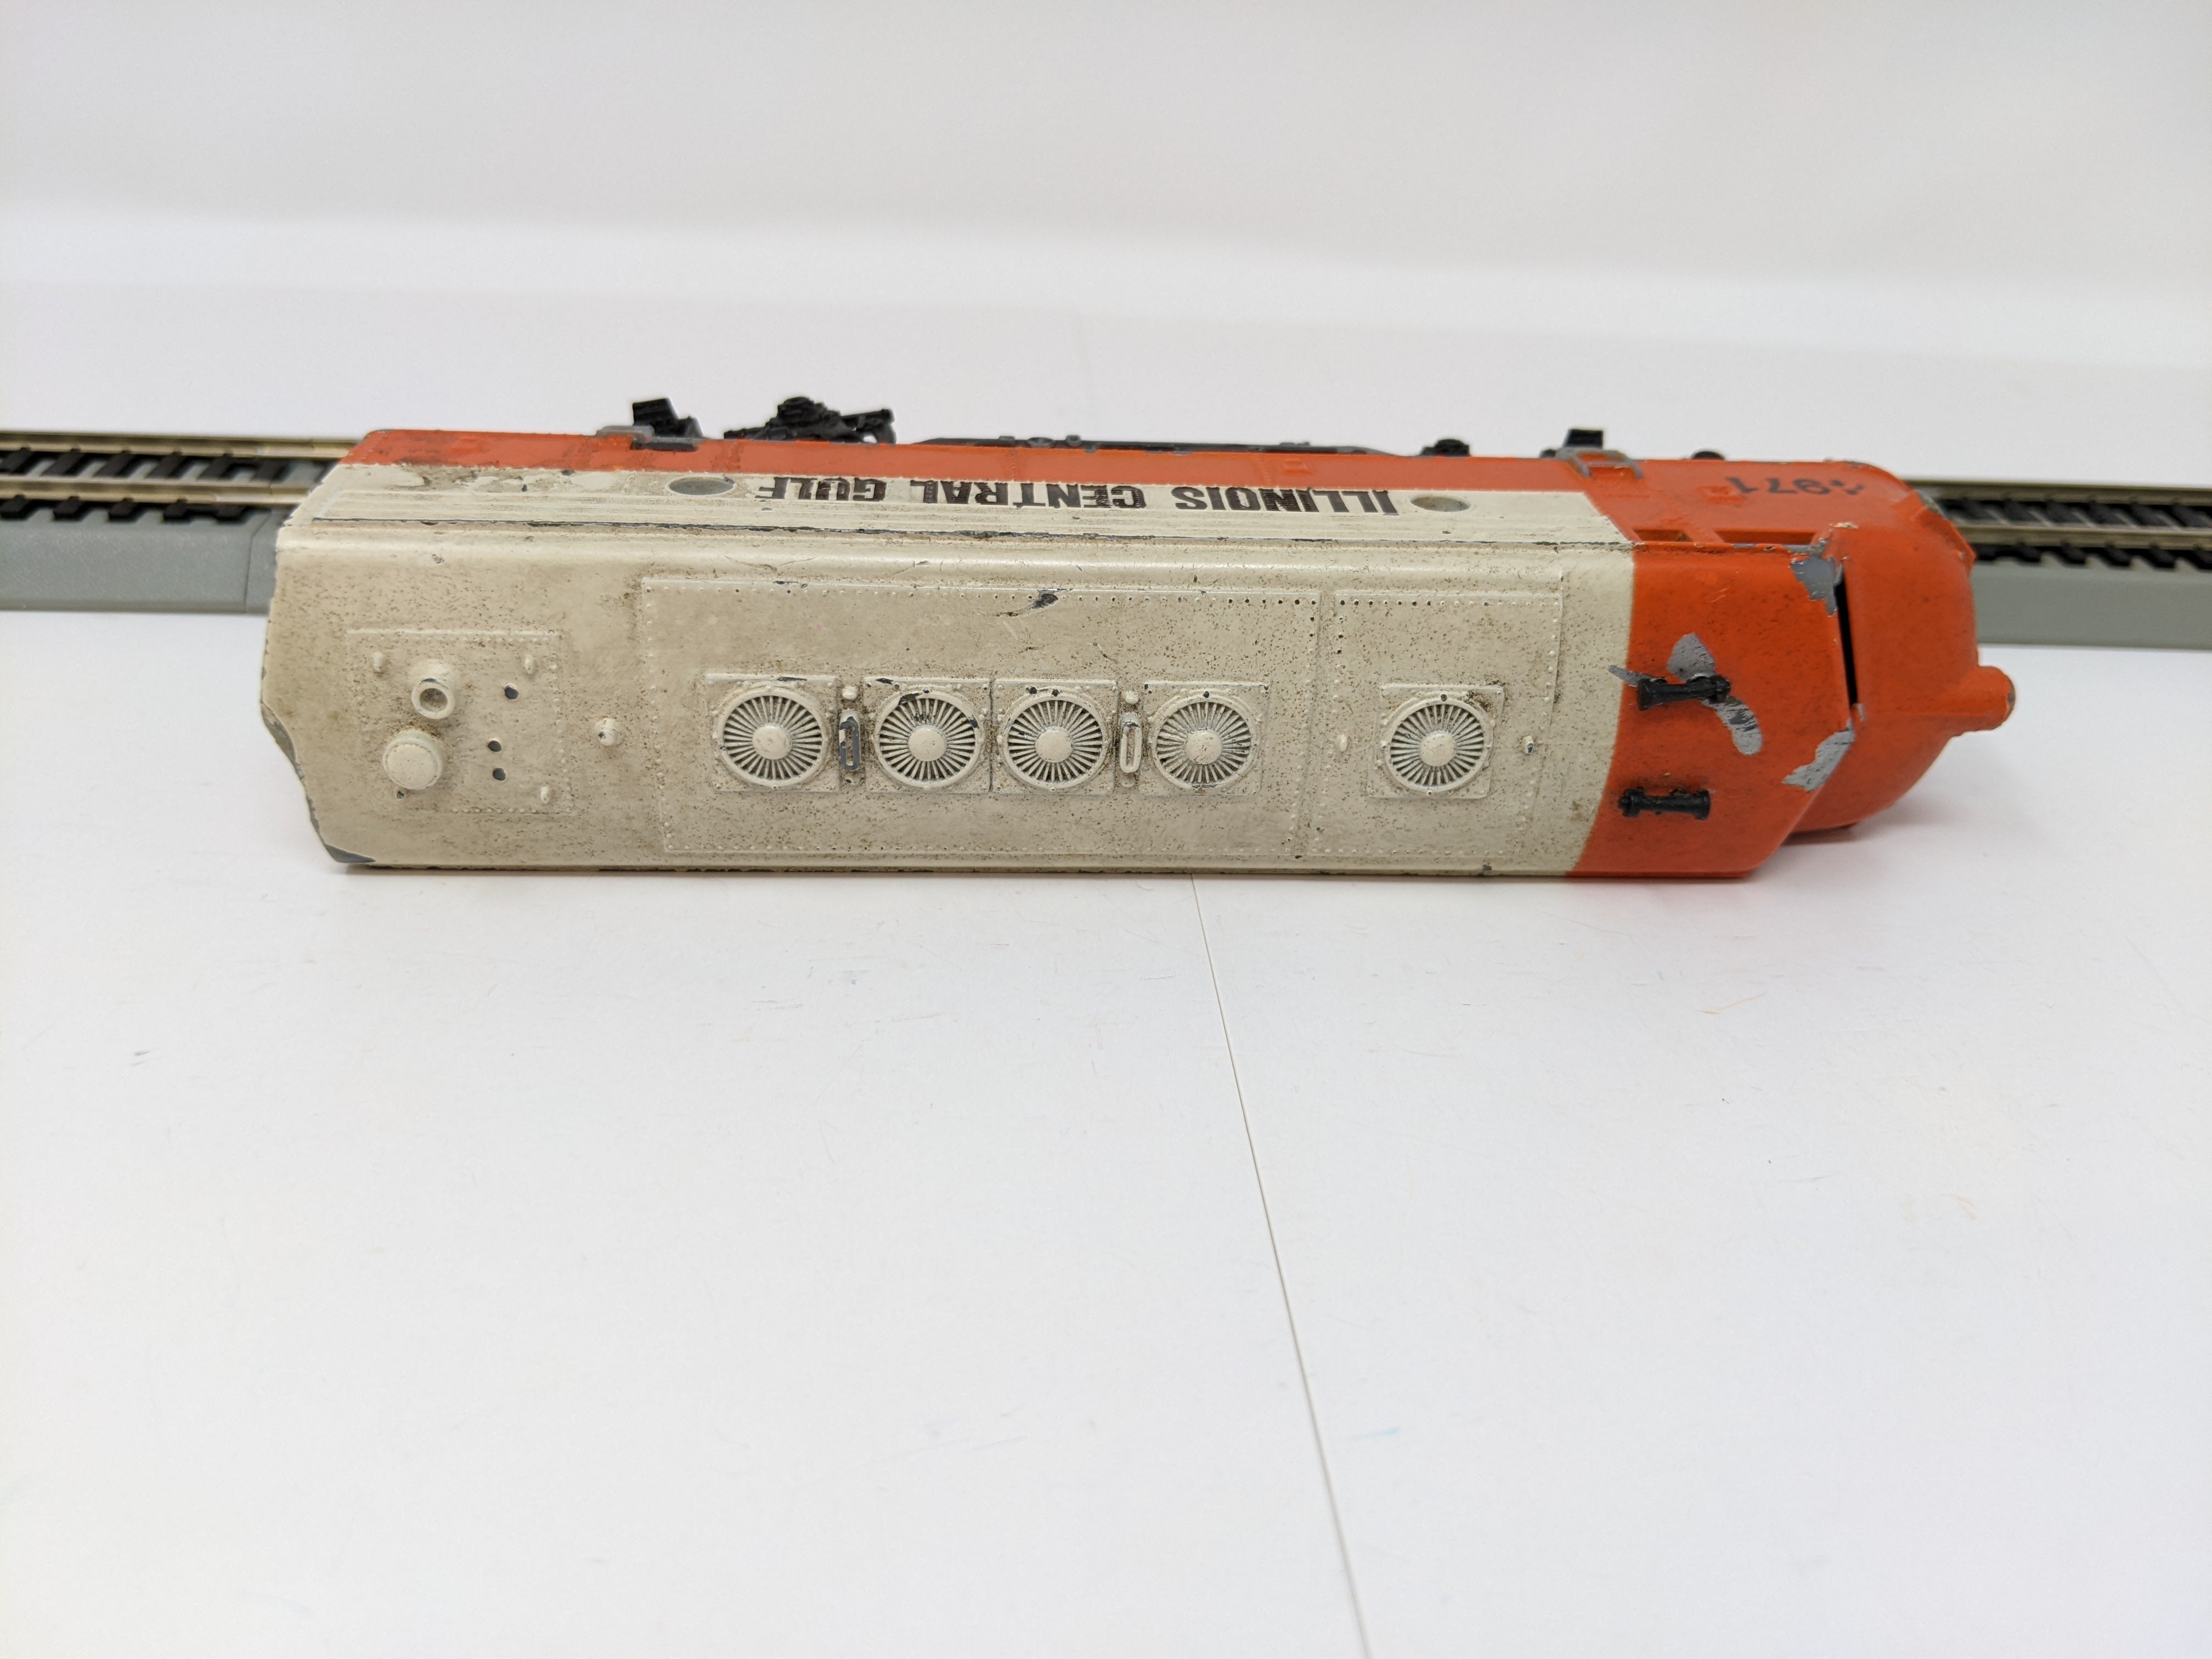 USED Life-Like HO Scale, F7A Diesel Locomotive, Illinois Central Gulf #4971, Needs Work (DC)